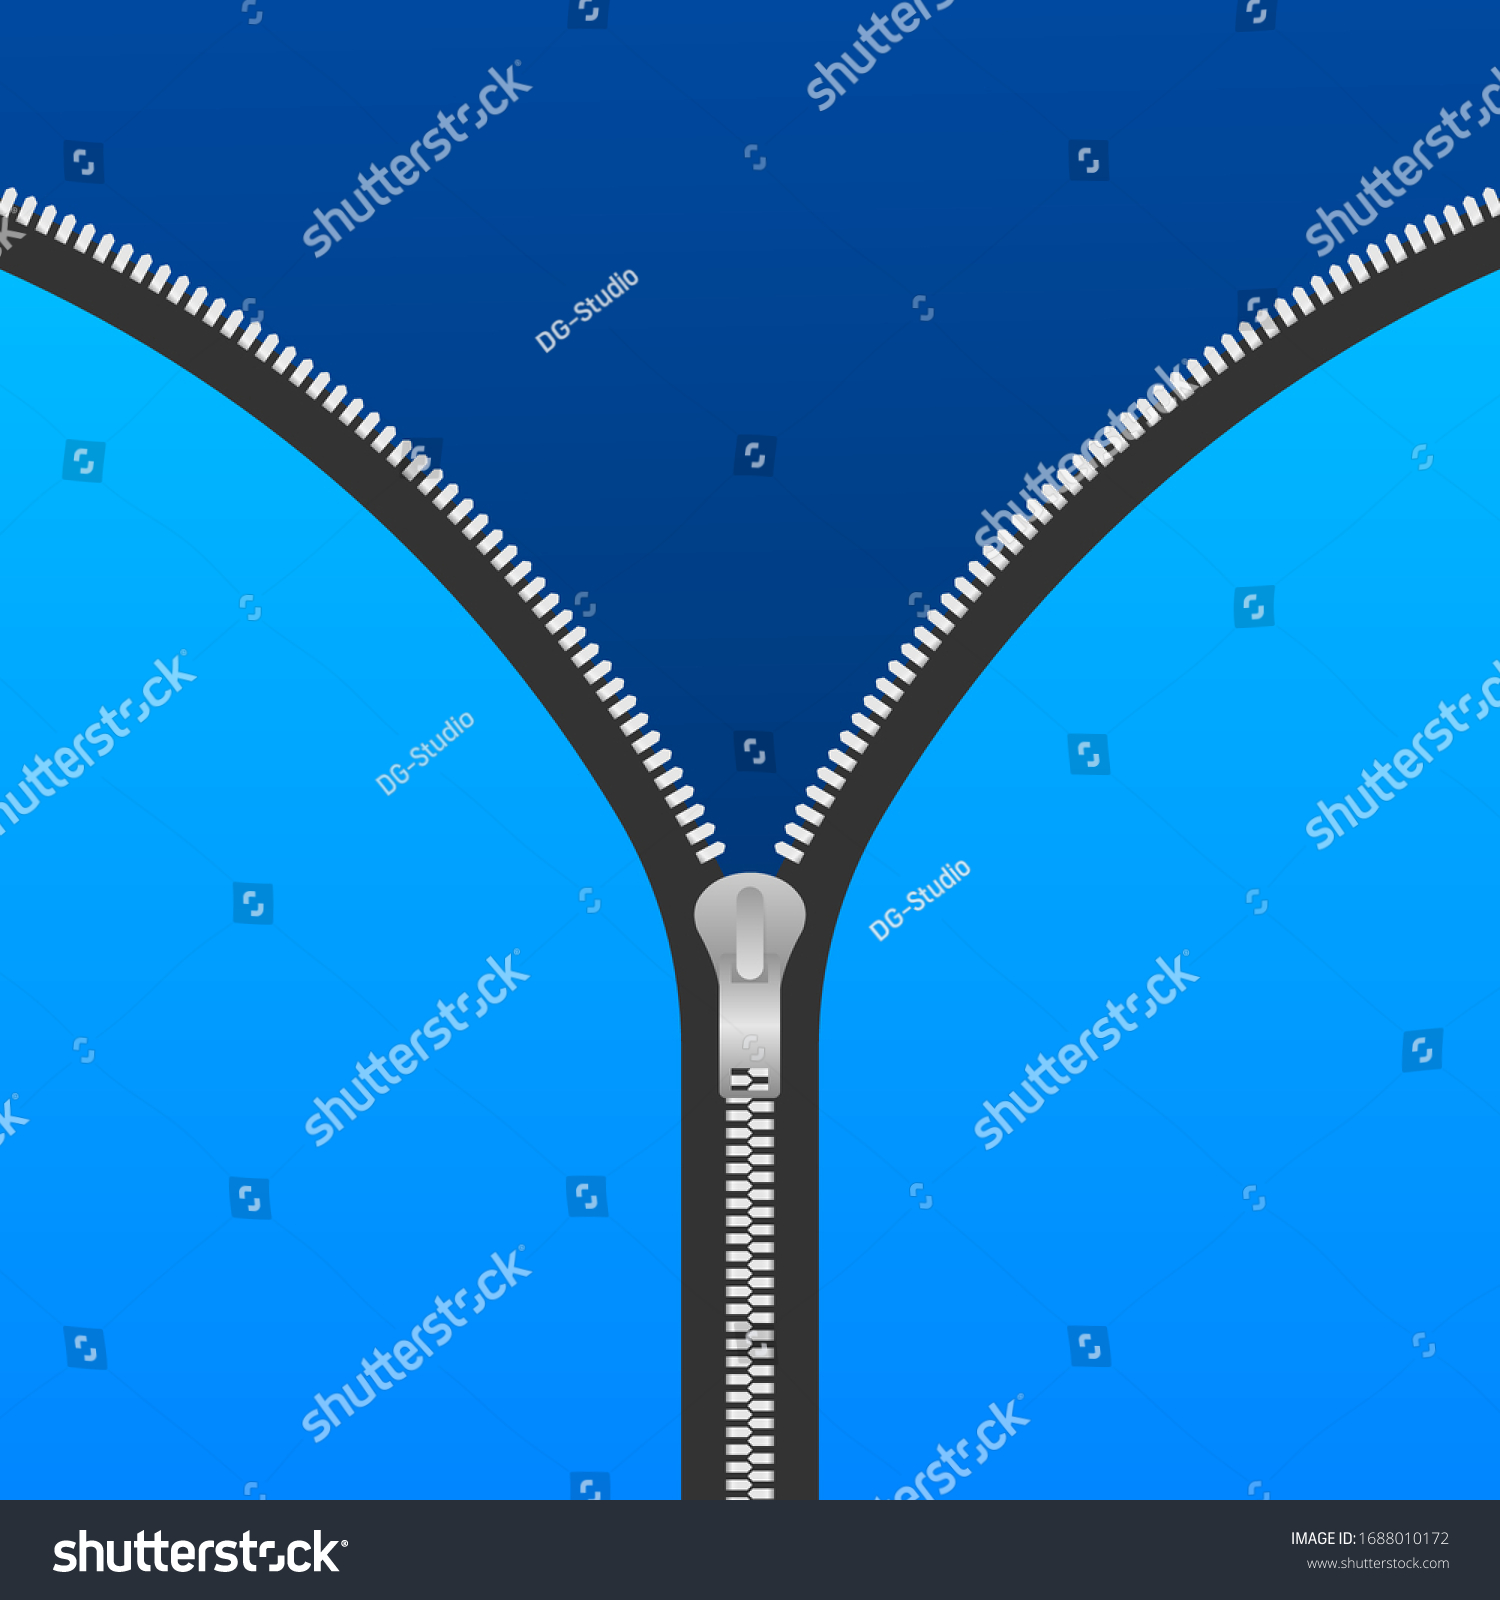 SVG of Sewing accessory zipper. Metallic open zippers and pullers. Stock vector illustration. svg